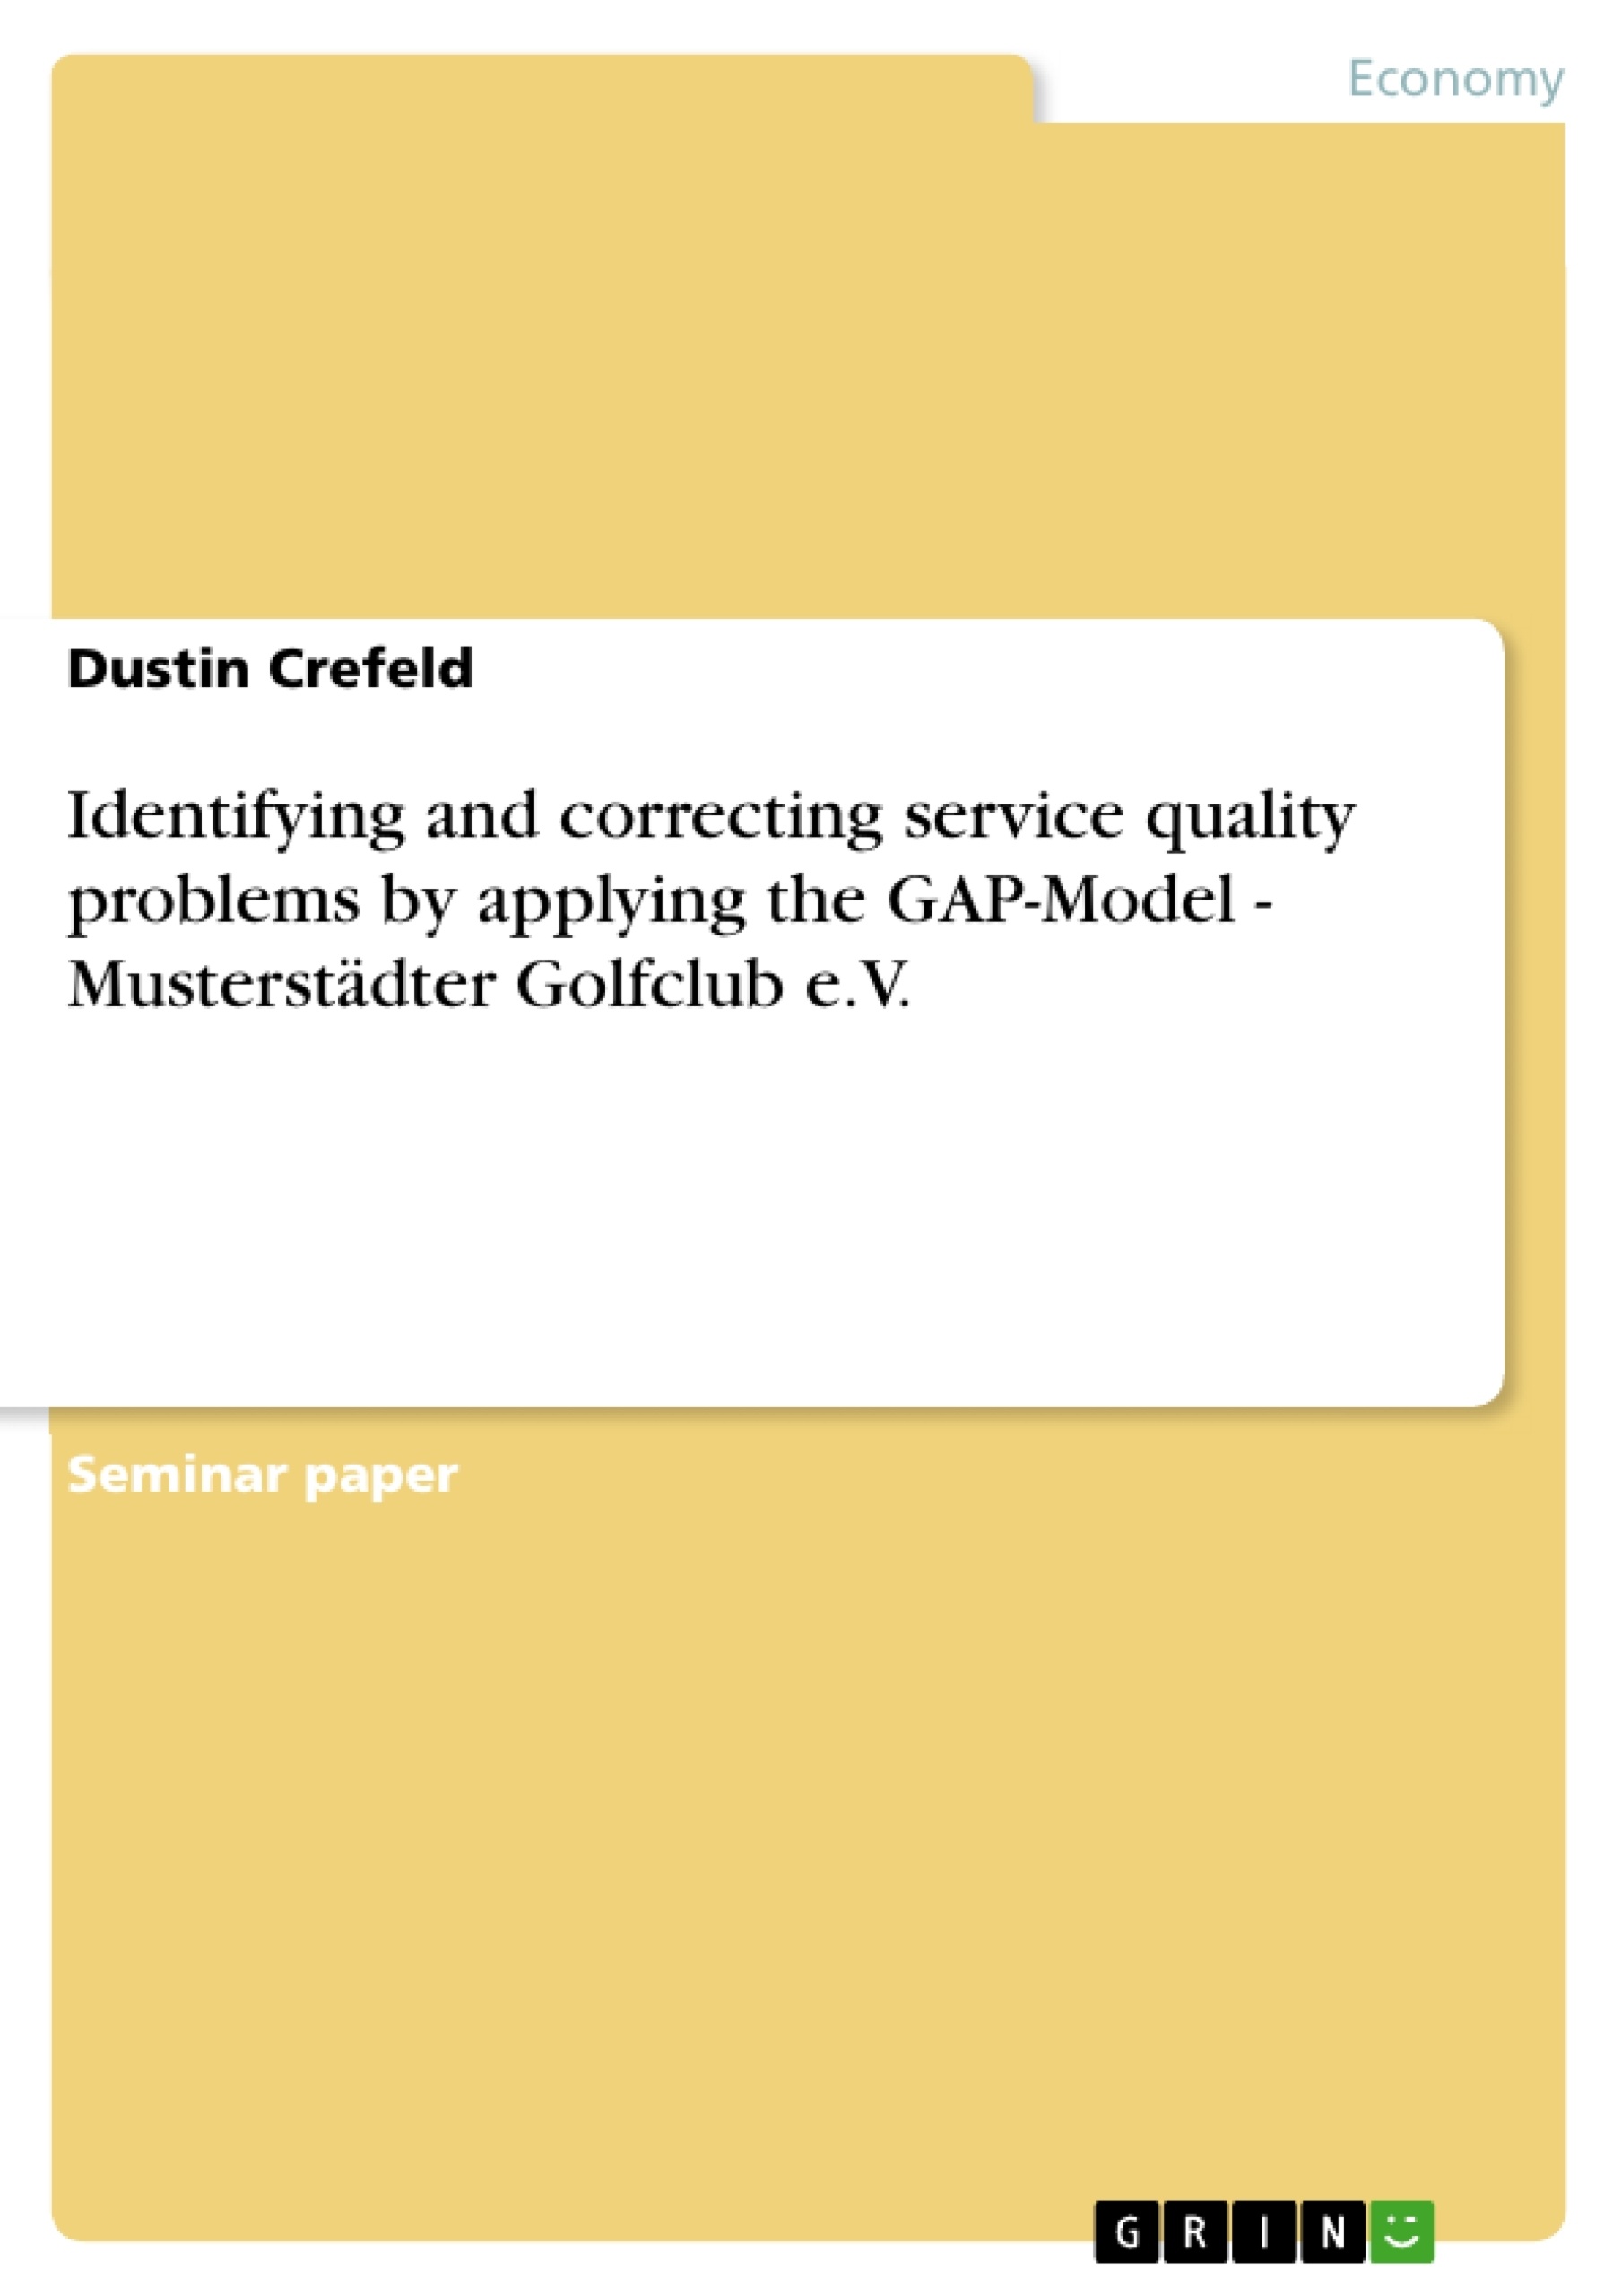 Titel: Identifying and correcting service quality problems by applying the GAP-Model - Musterstädter Golfclub e.V.